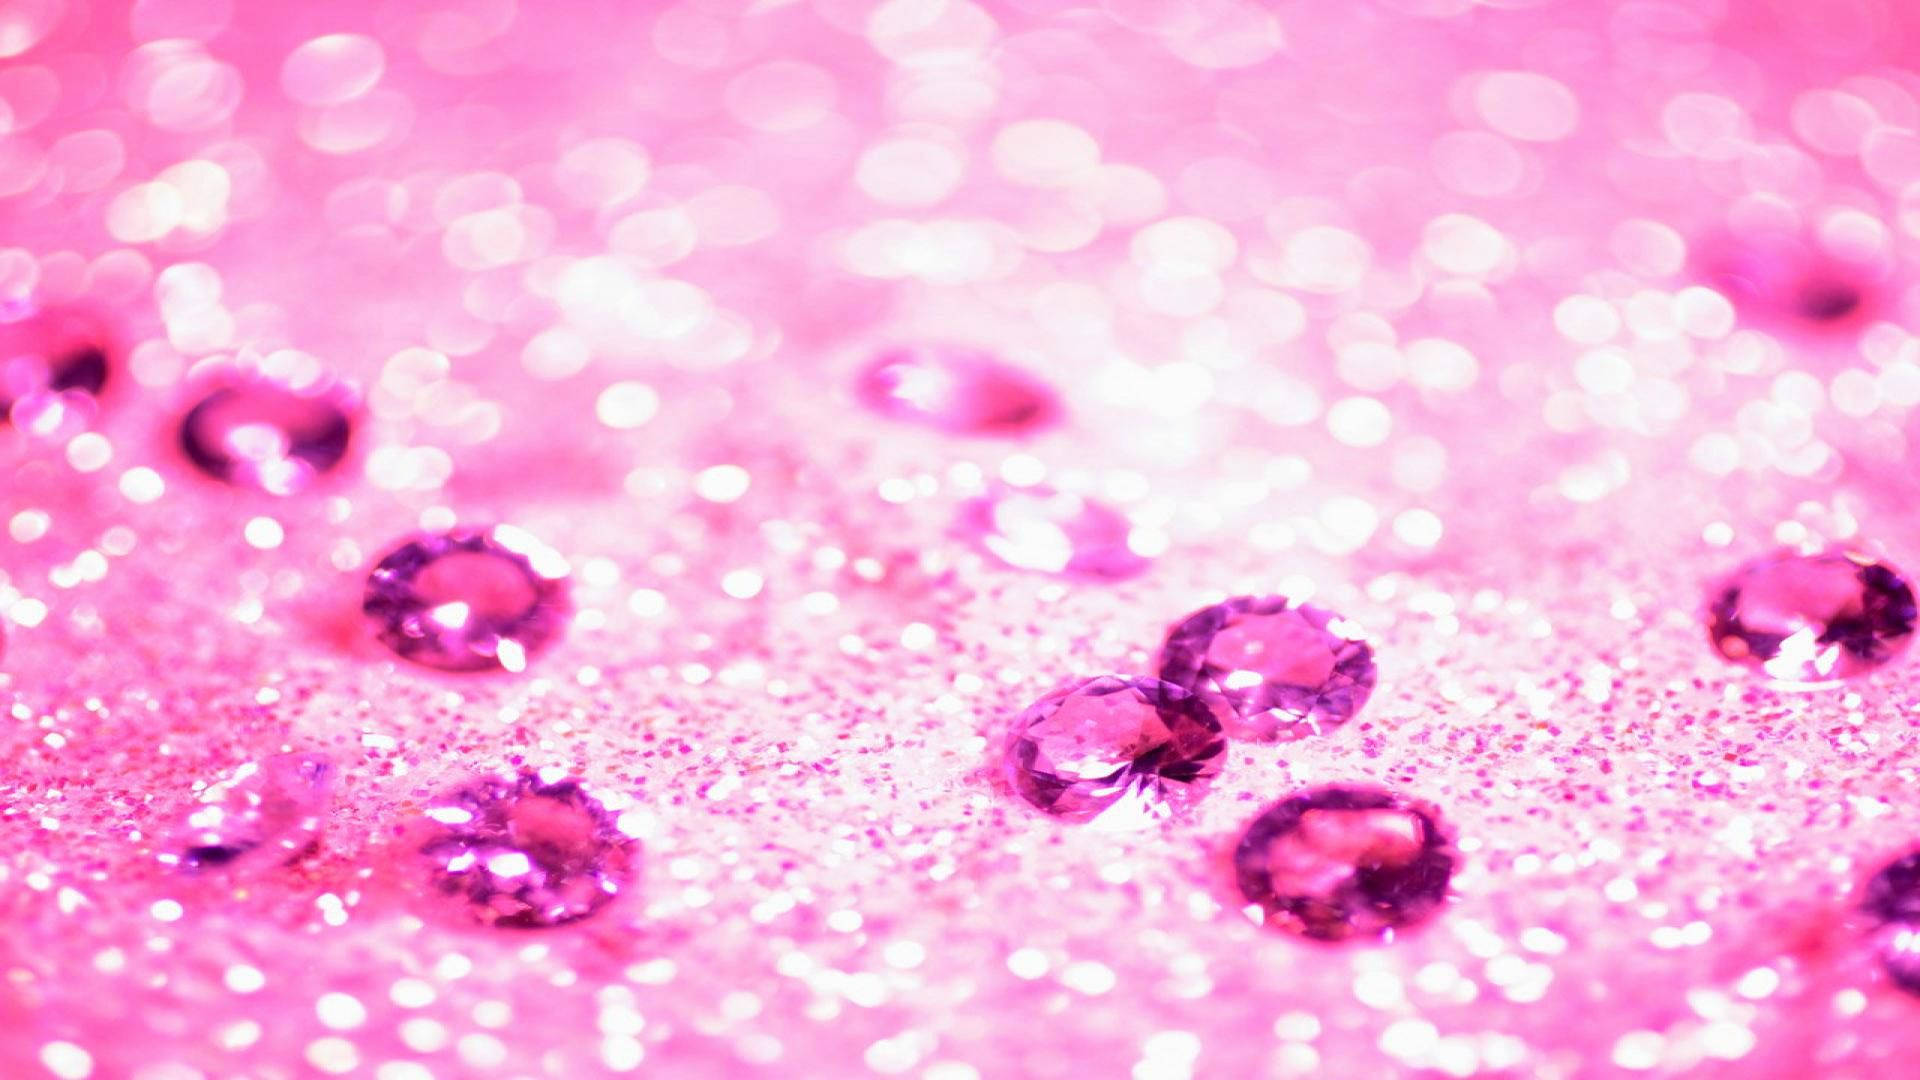 "magical Sparkle Of Pink Glitter" Wallpaper